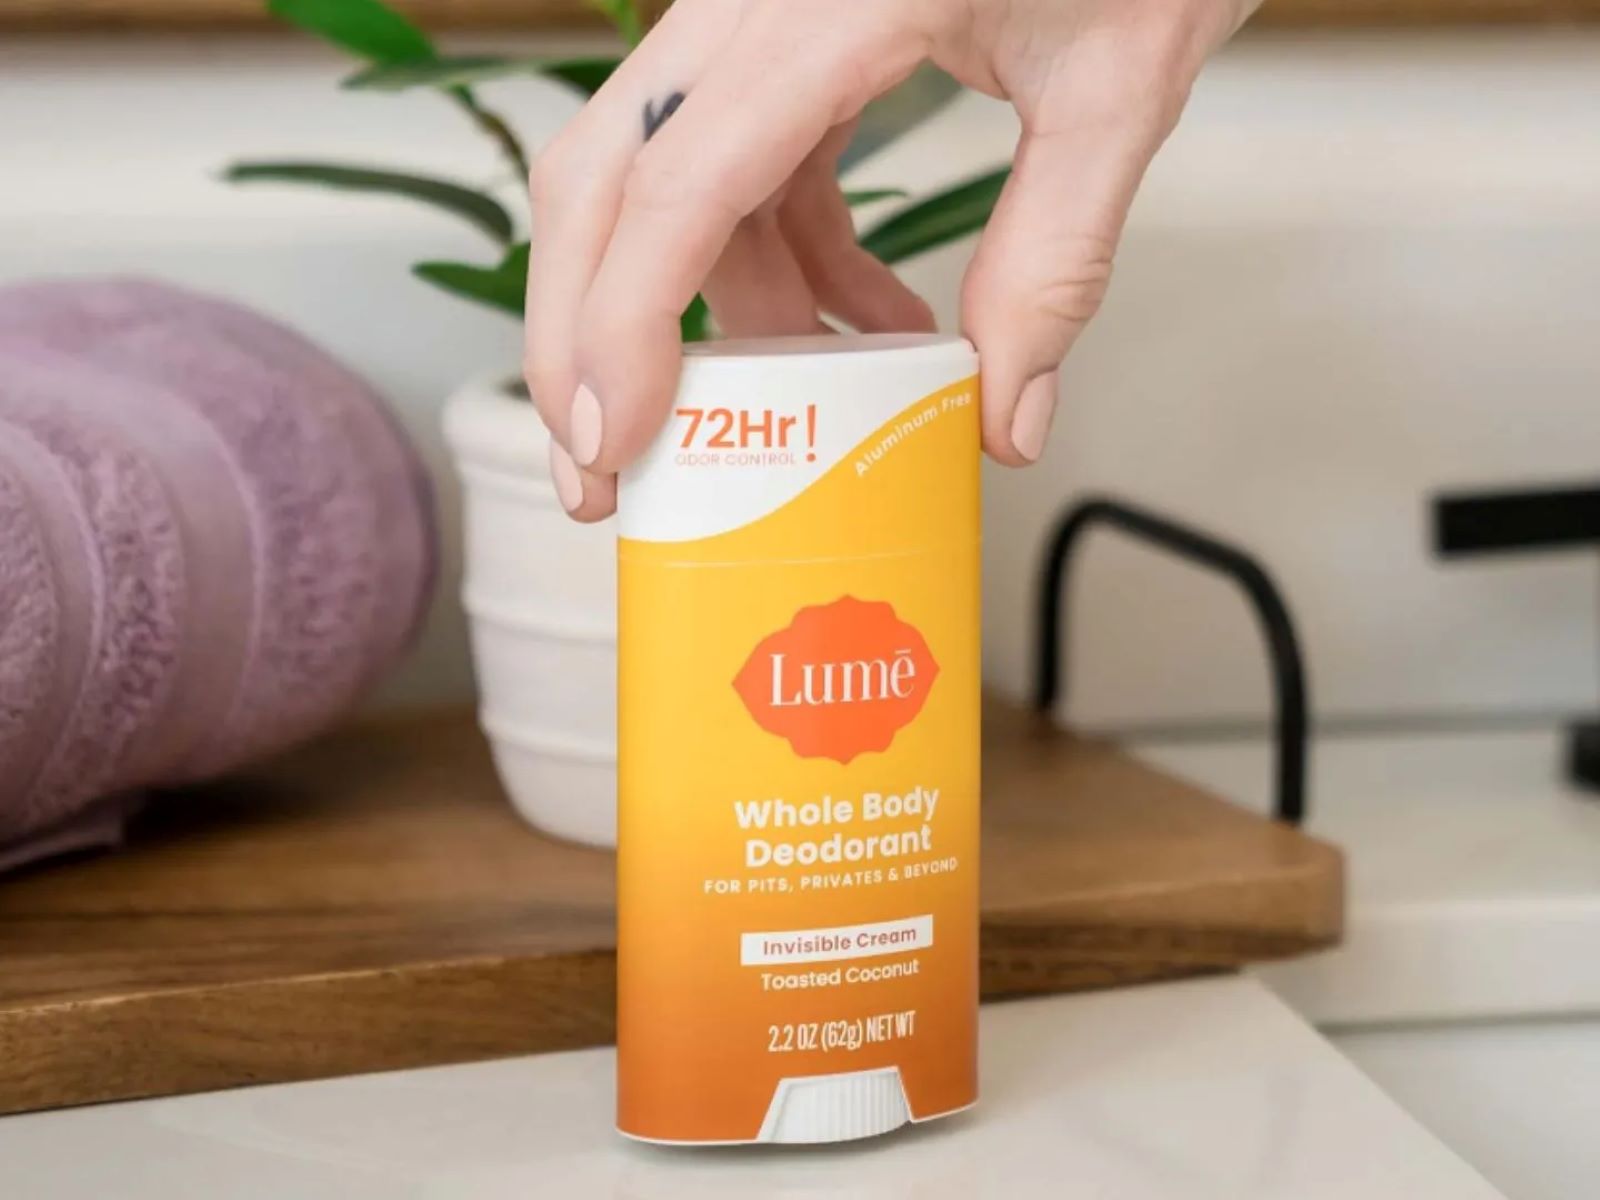 Lume: The Revolutionary Deodorant That Outperforms All Others!